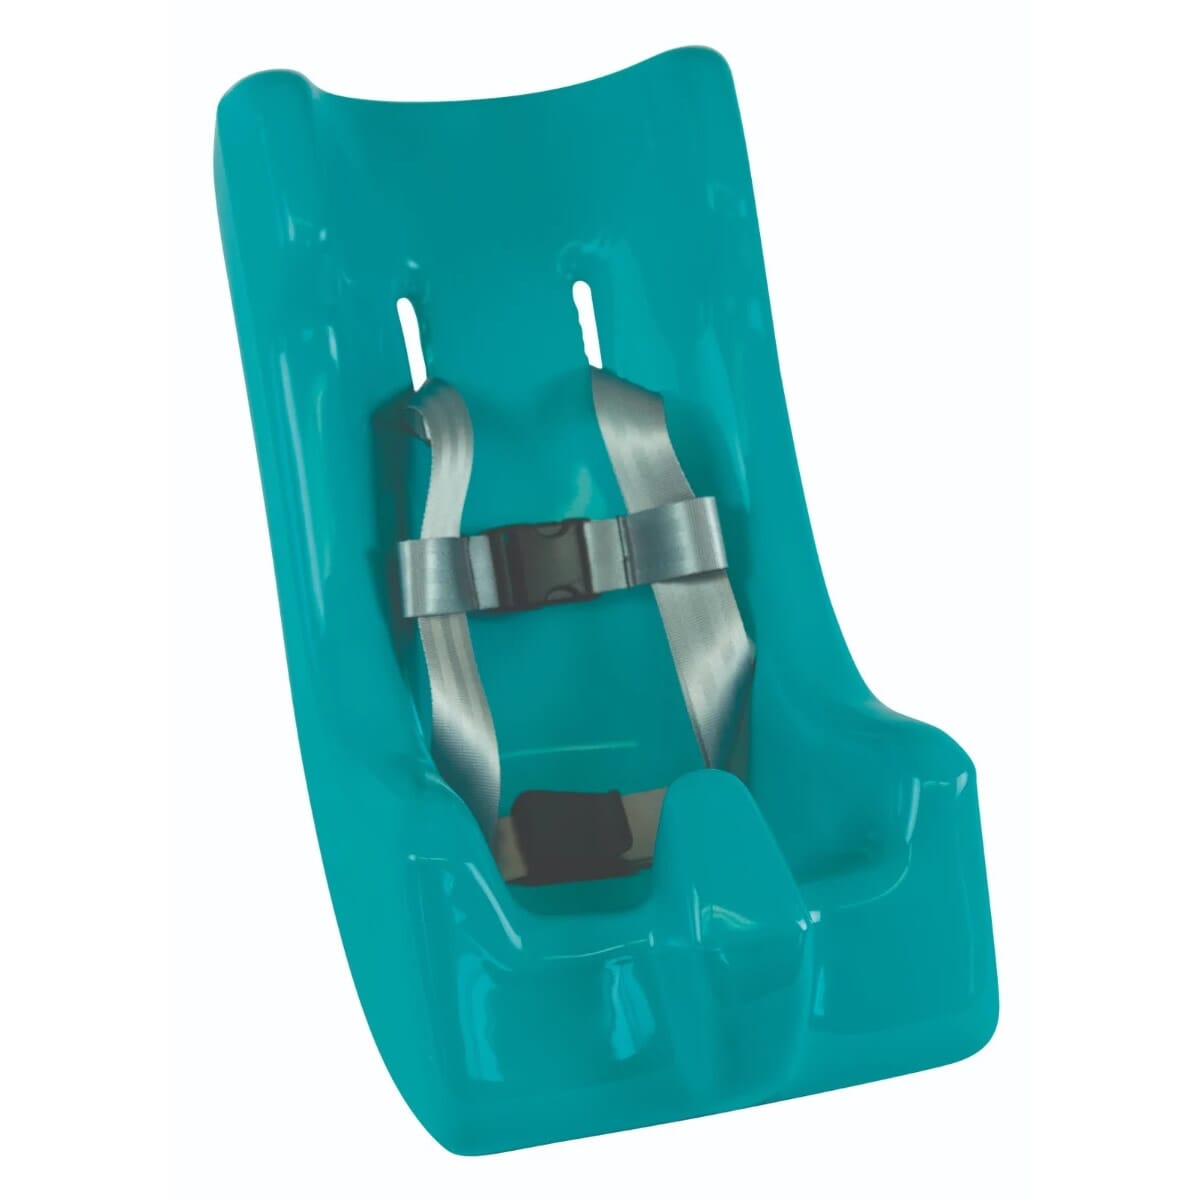 View Tumble Forms Feeder Seat Teal Small information